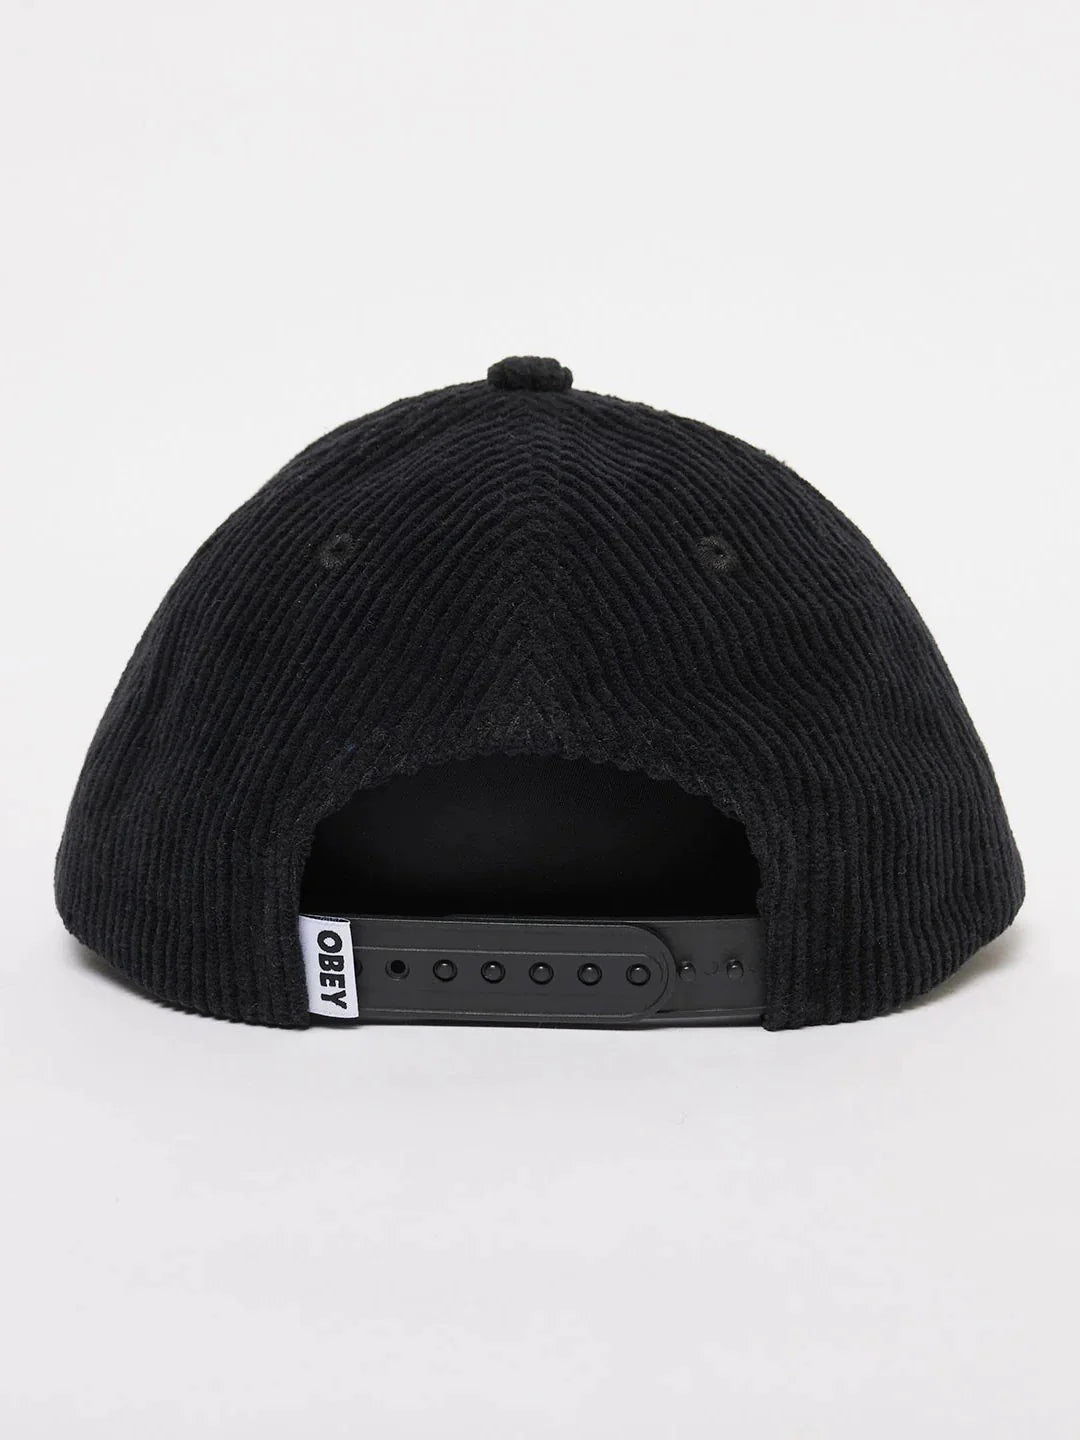 Obey Wizard 6 Panel SnapBack